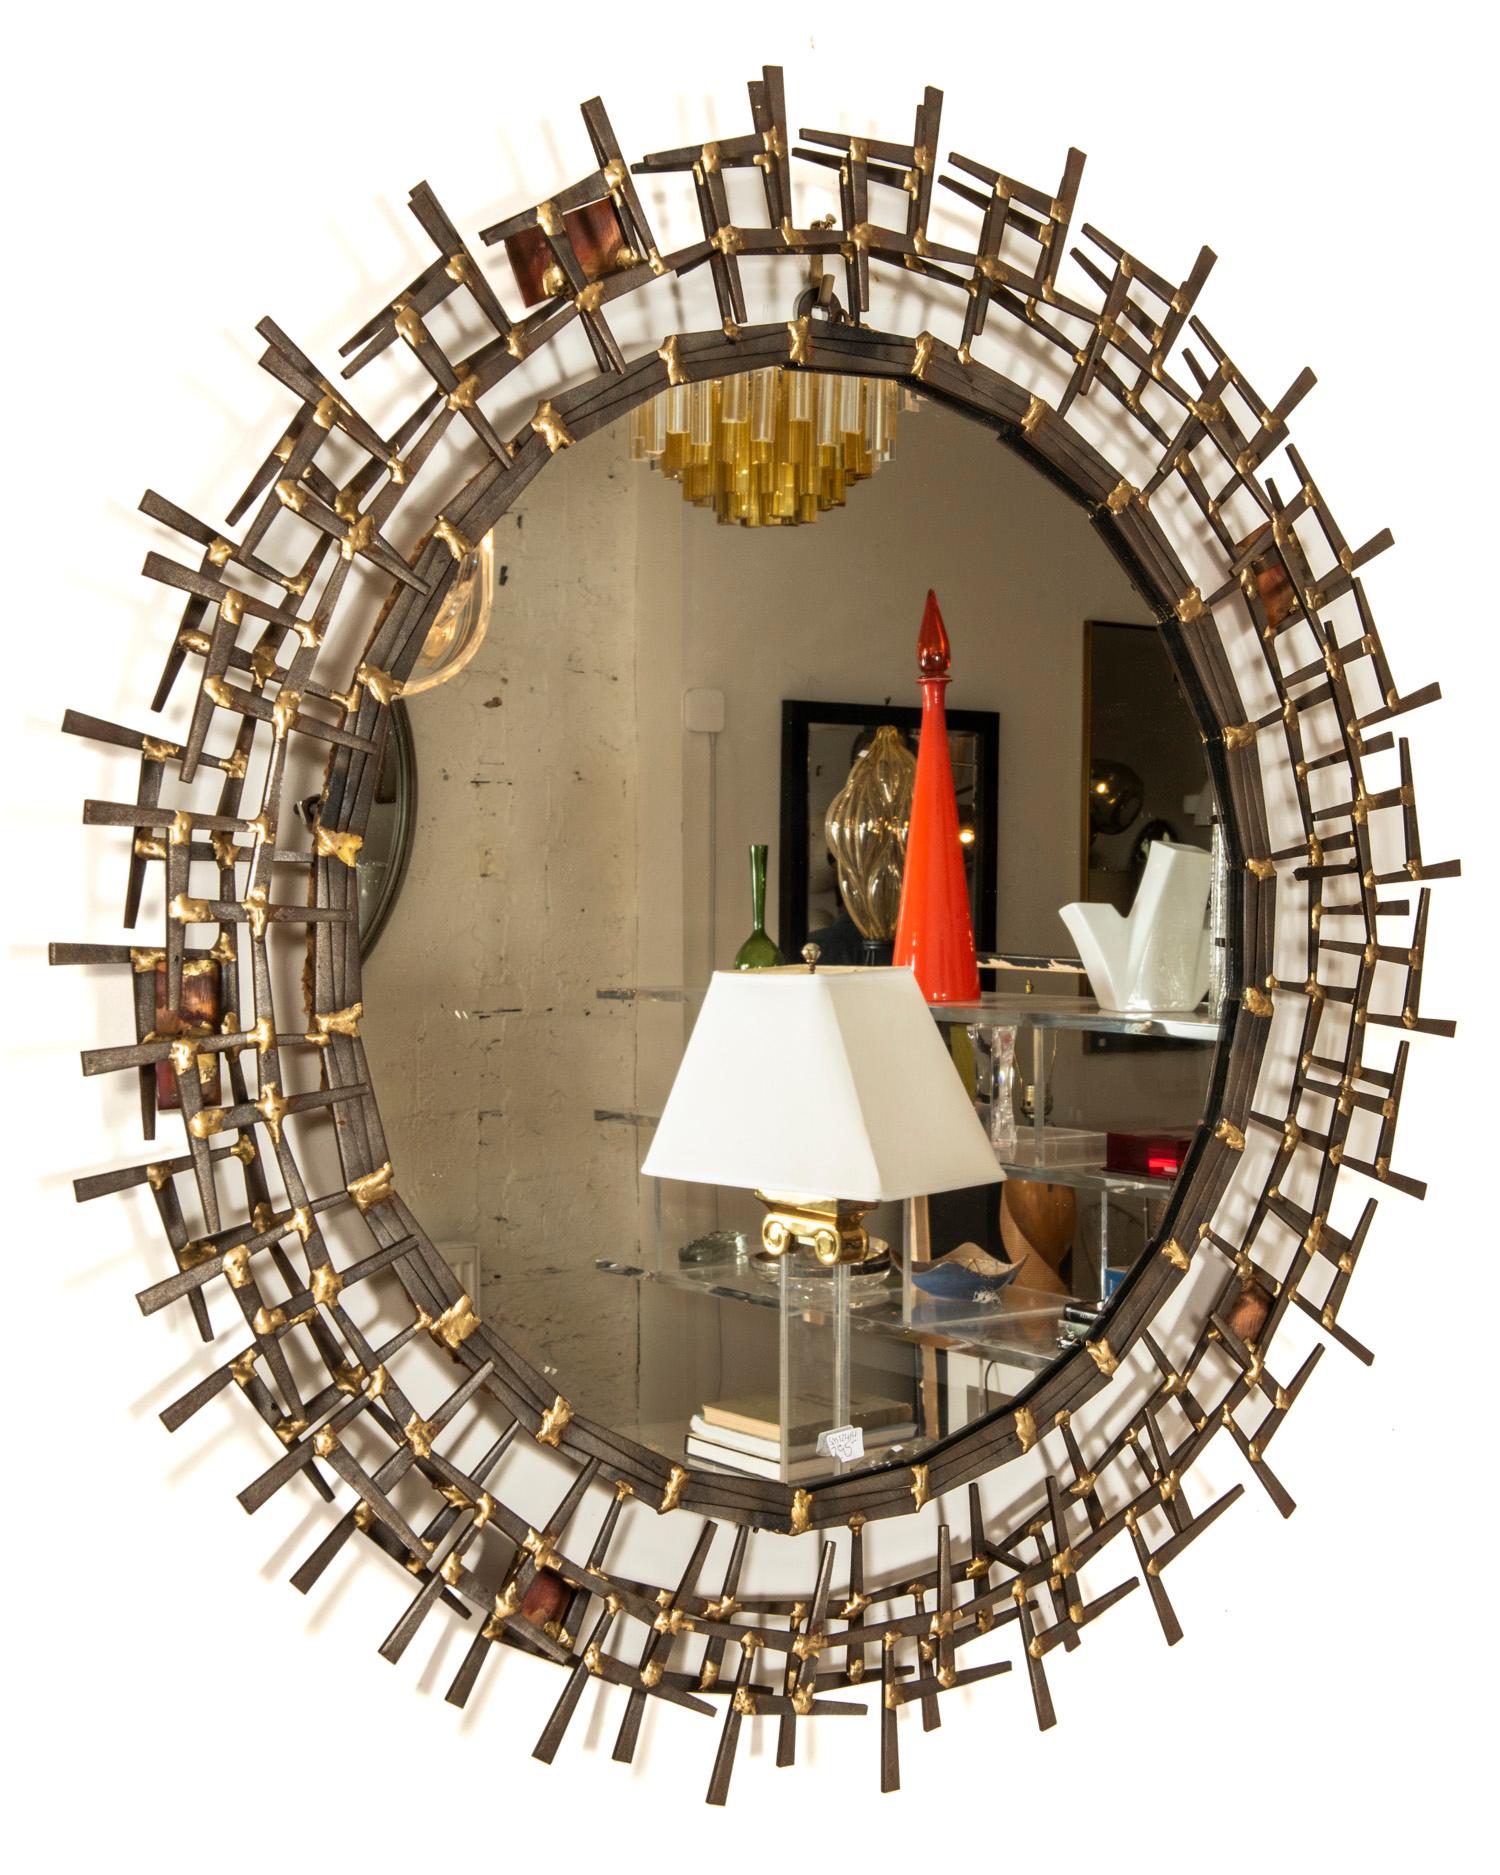 A cool vintage metal sunburst style mirror with welded pieces accented with copper and gold braising!